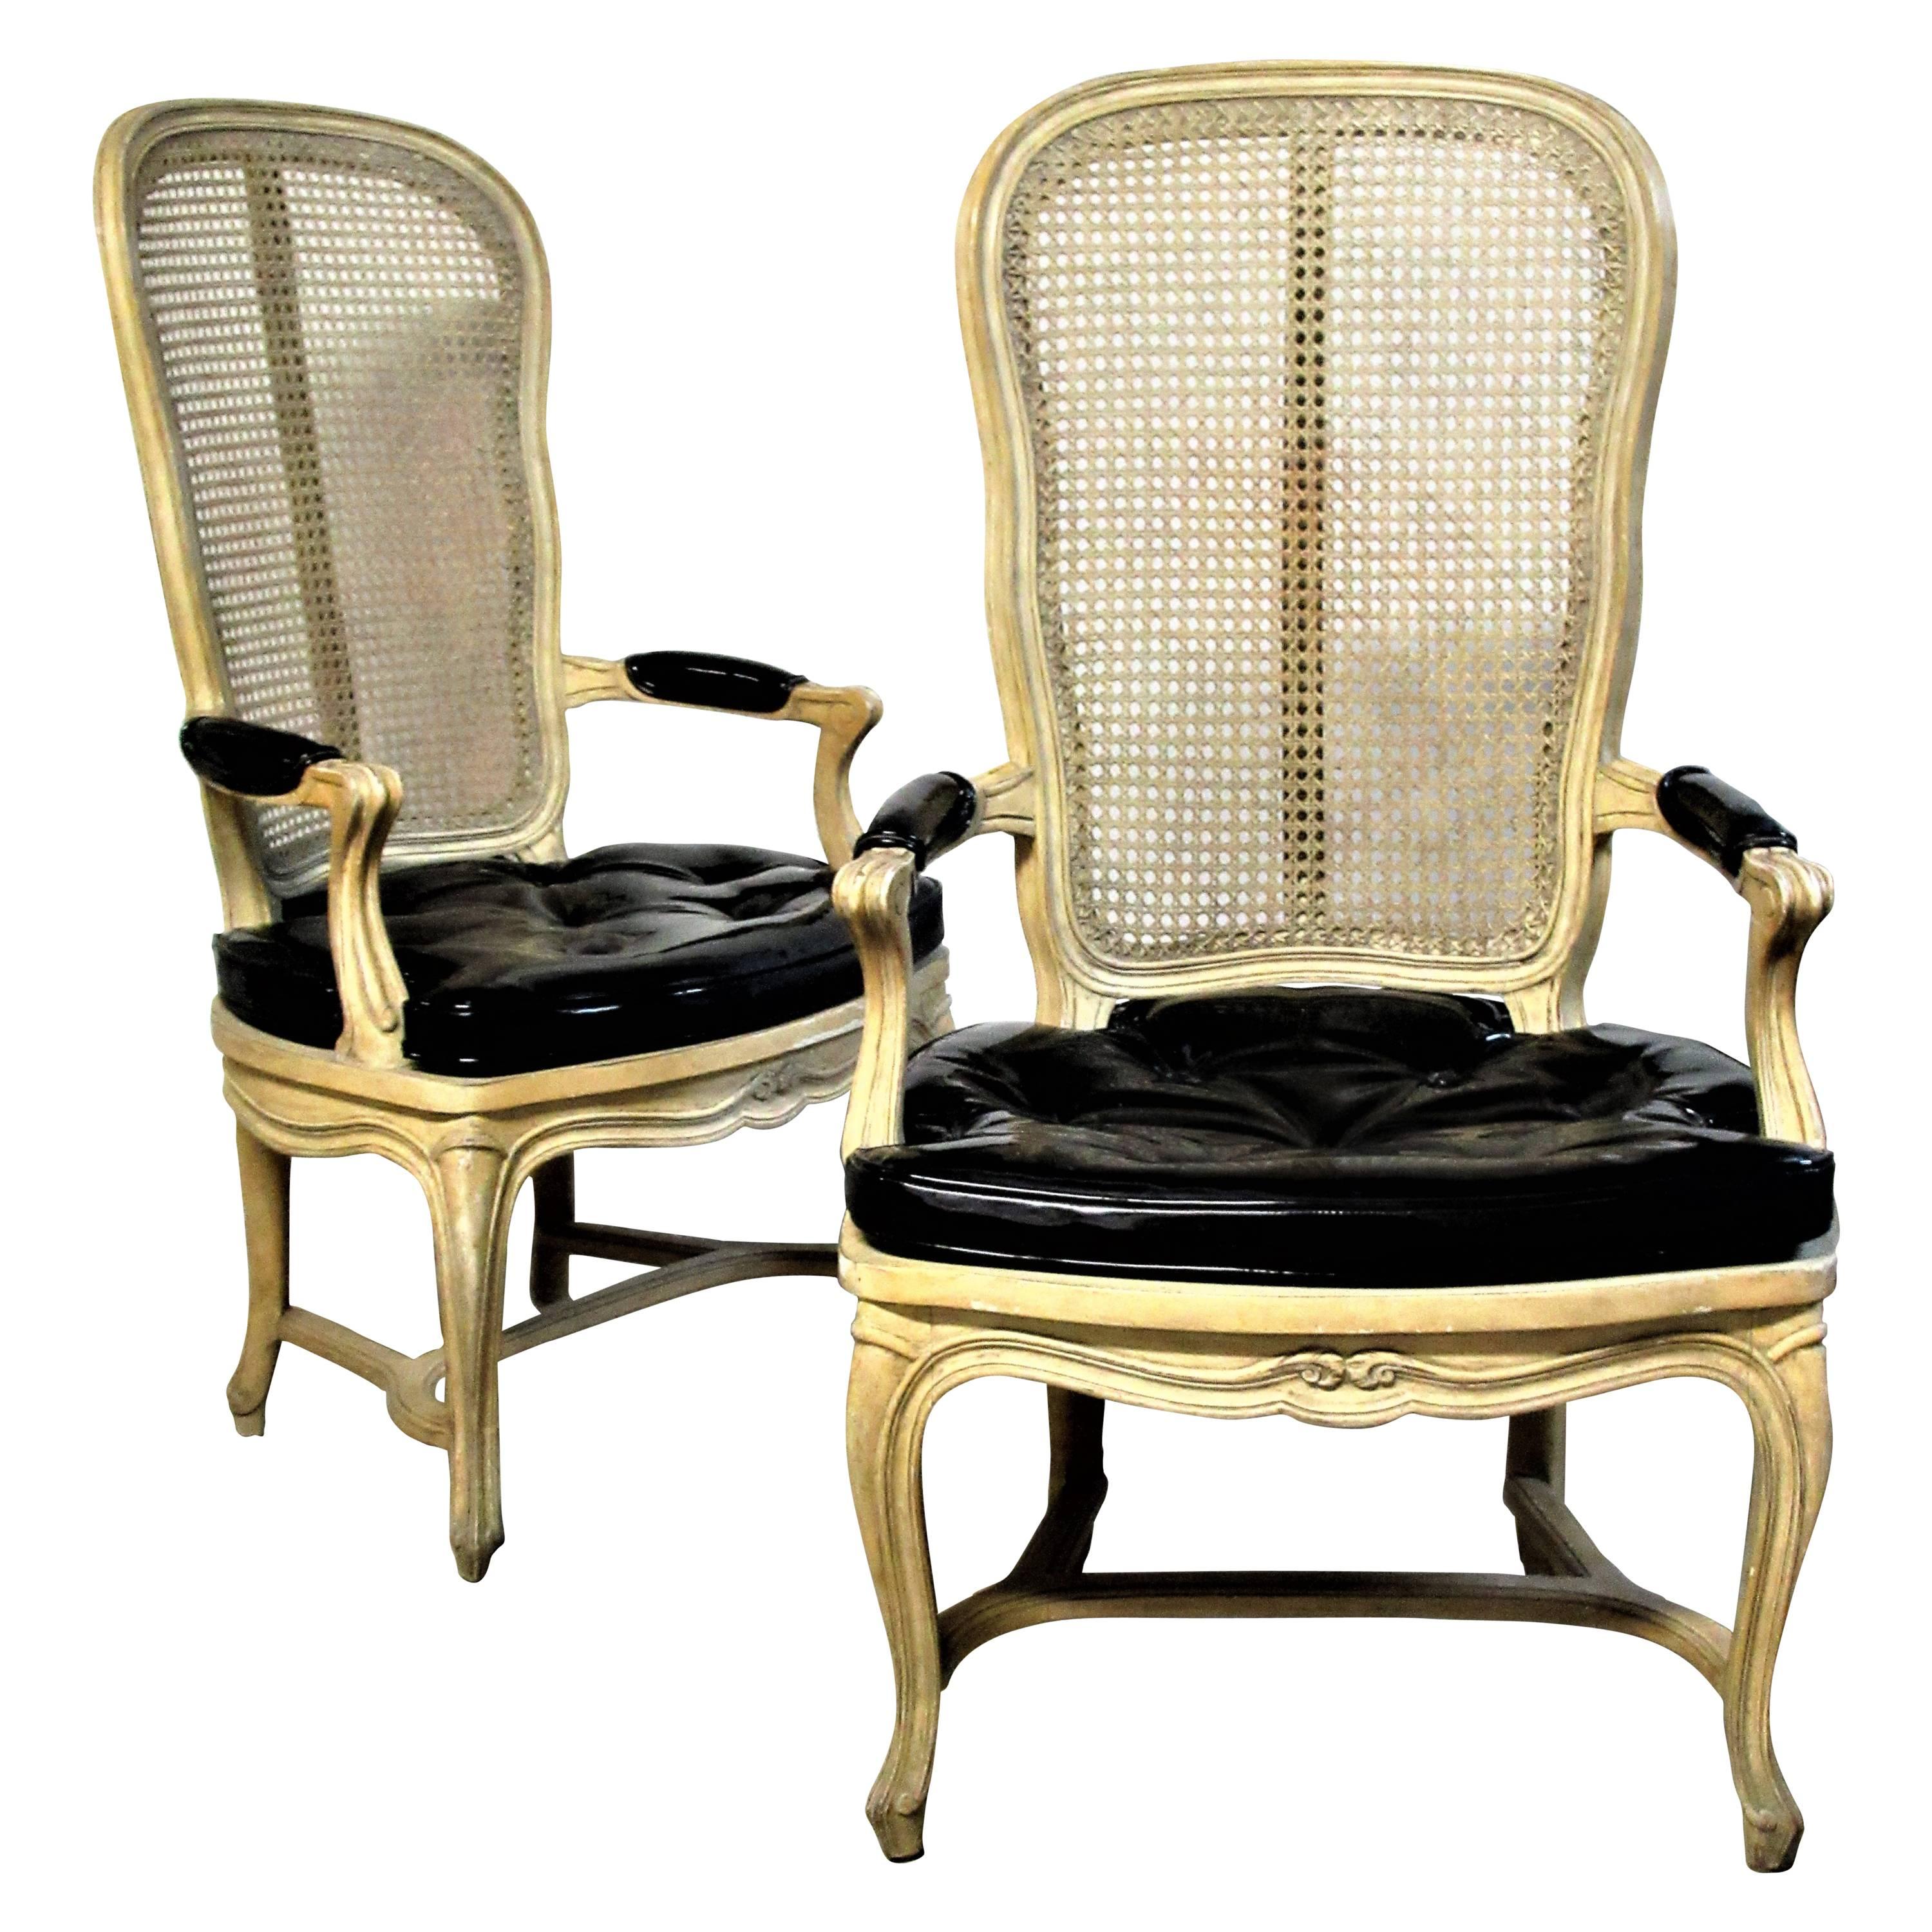 Hollywood Regency Cane Back Chairs style Louis XV